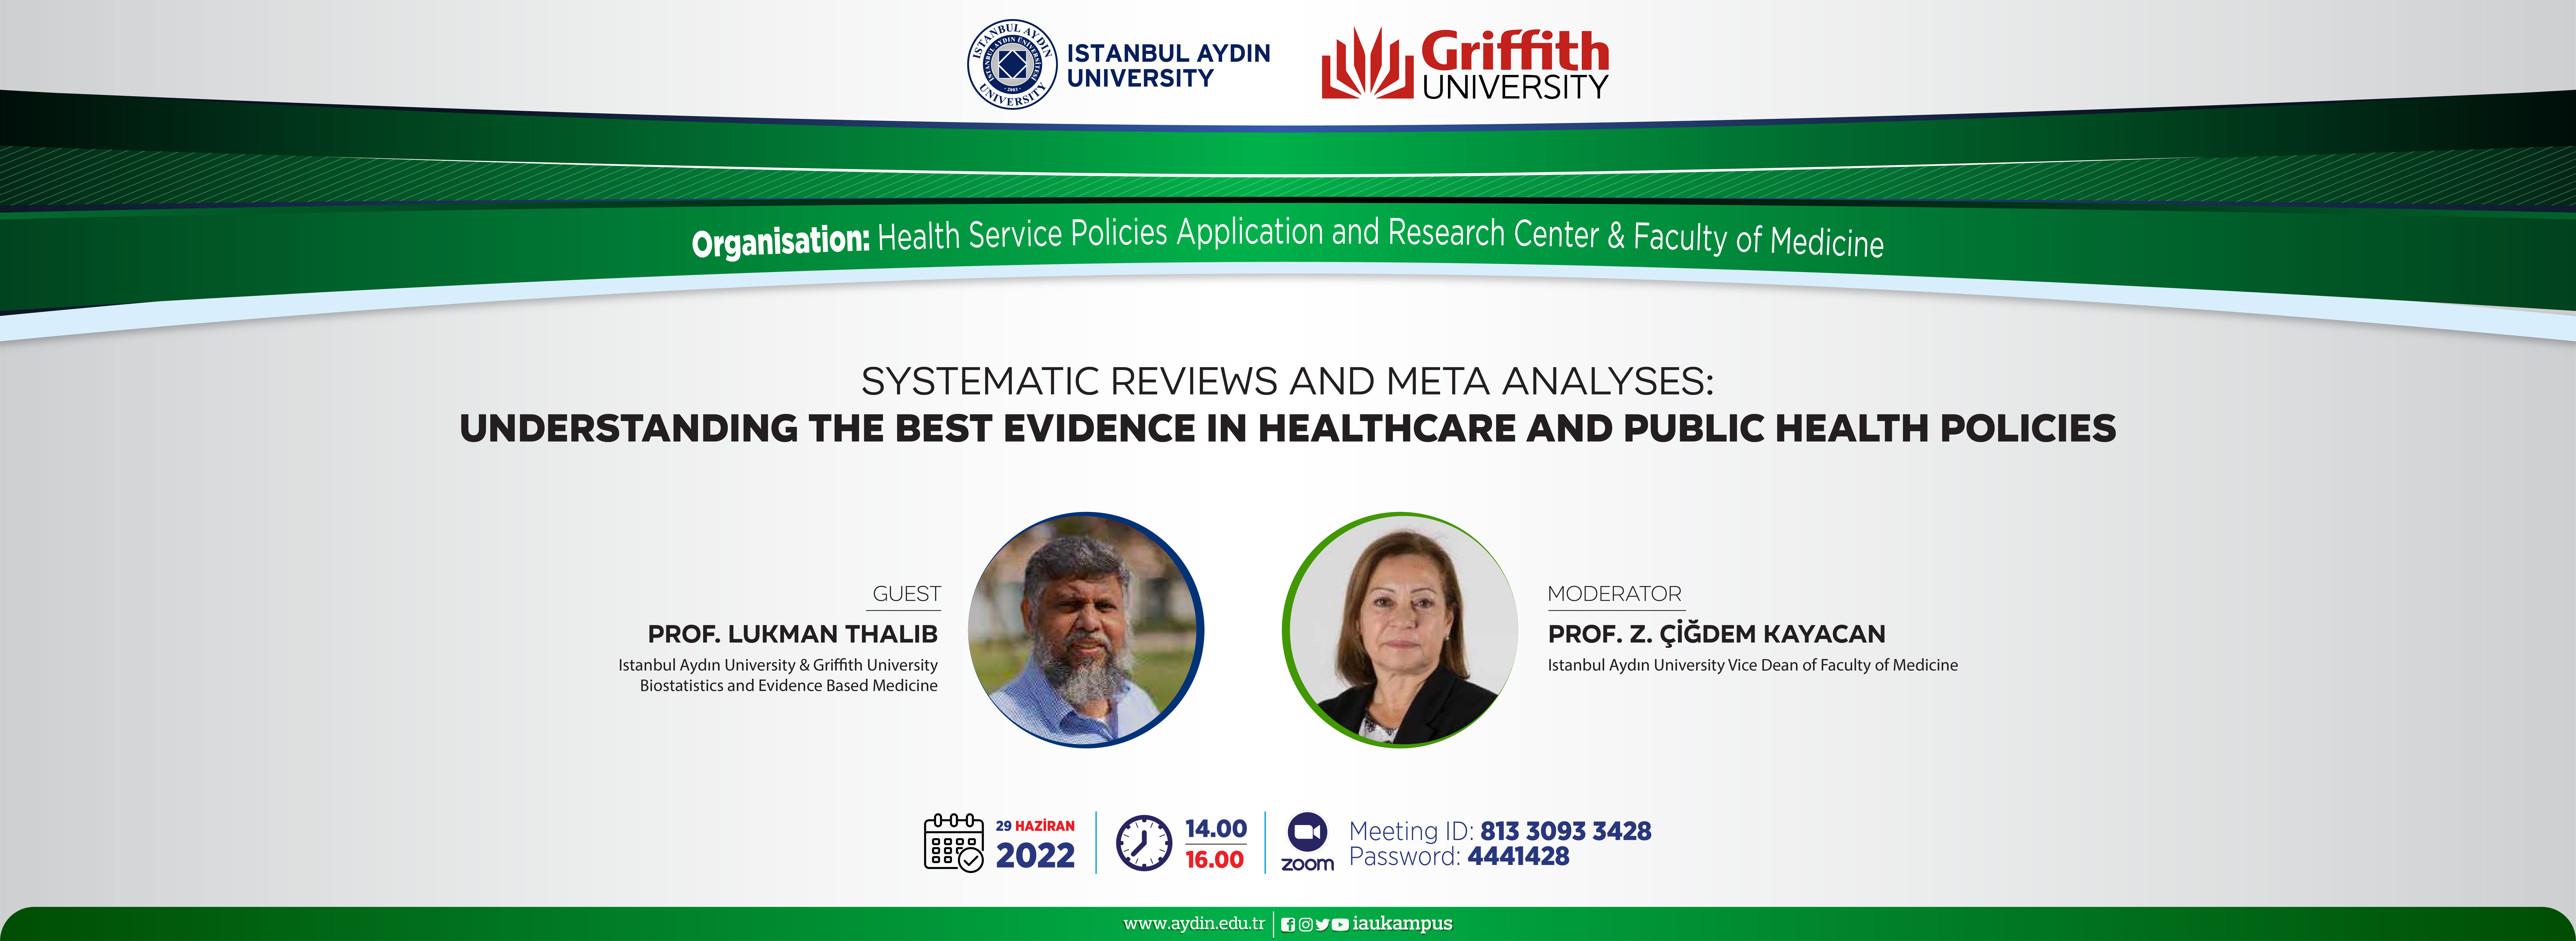 Systematic Reviews and Meta Analyses- Understanding the Best Evidence in Healthcare and Public Health Policies-Banner.jpg